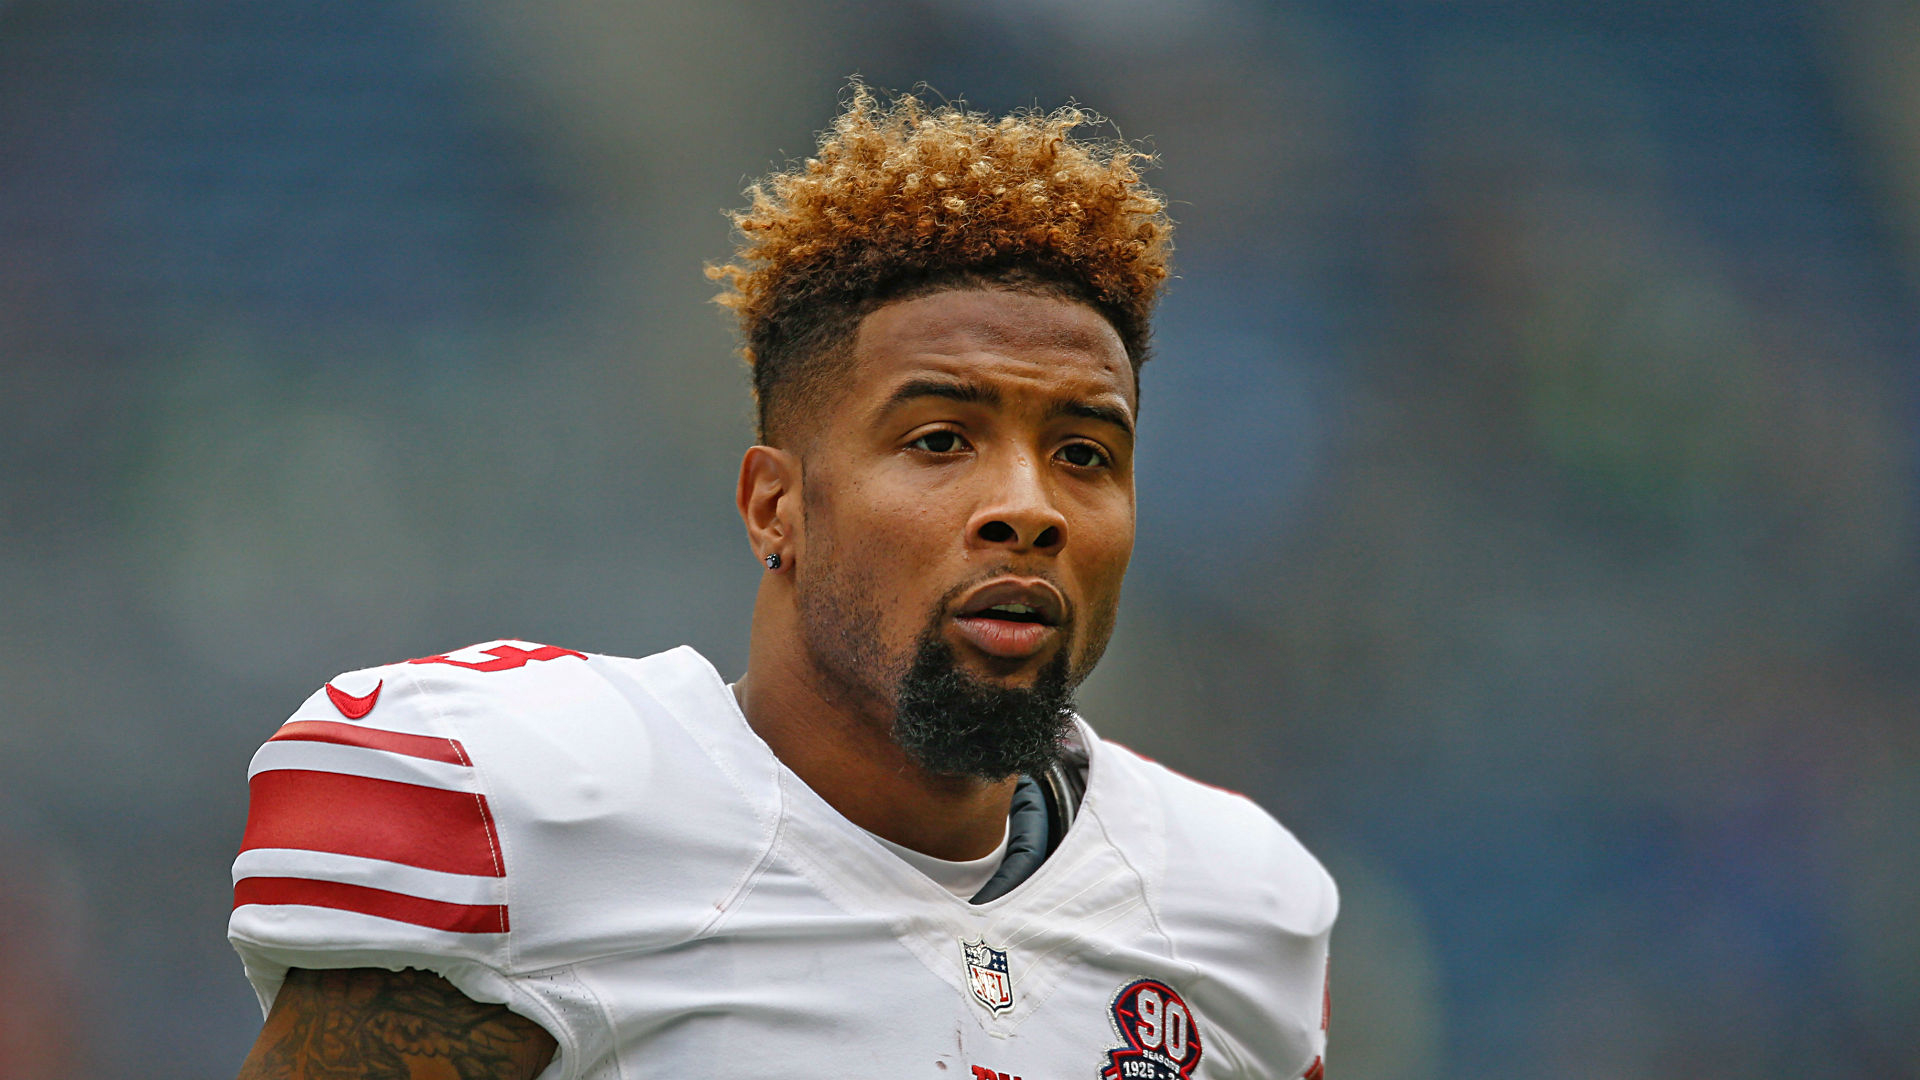 1920x1080 10+ Odell Beckham Jr. HD Wallpapers and Backgrounds